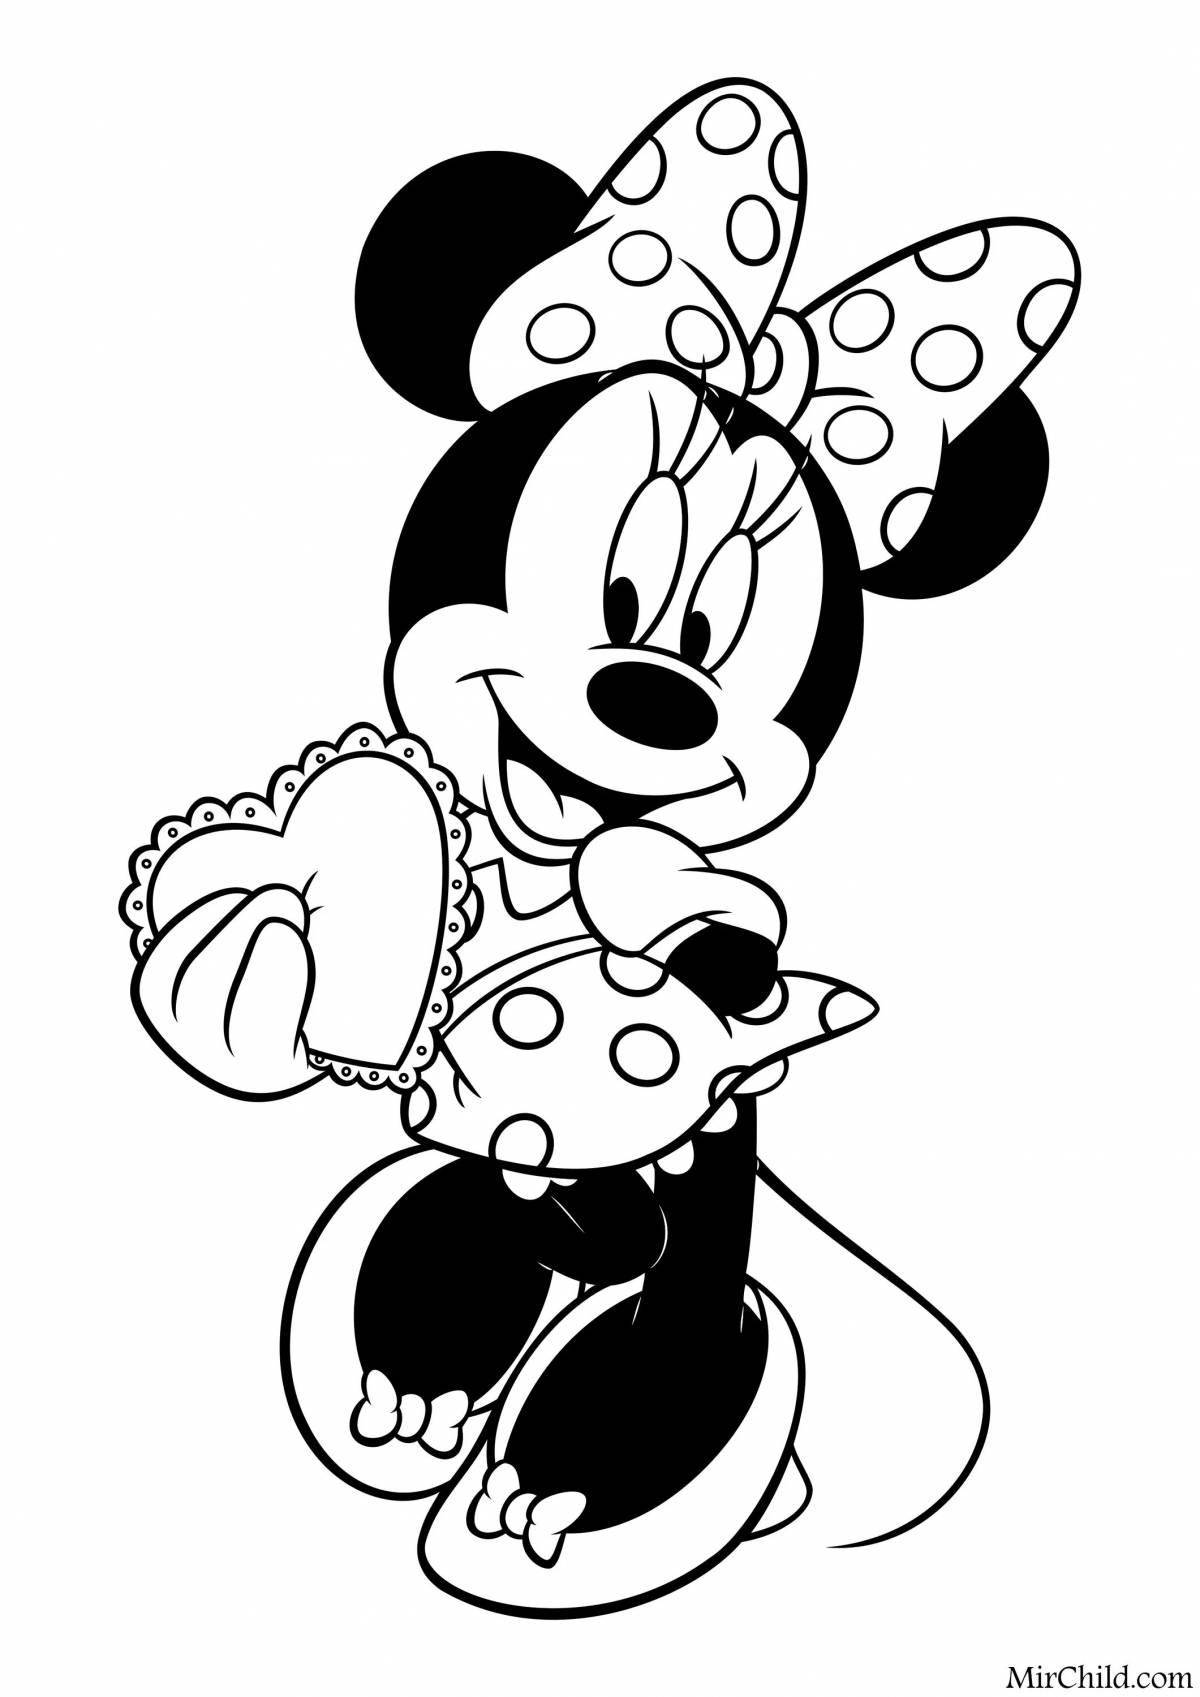 Amazing Minnie Mouse Coloring Page